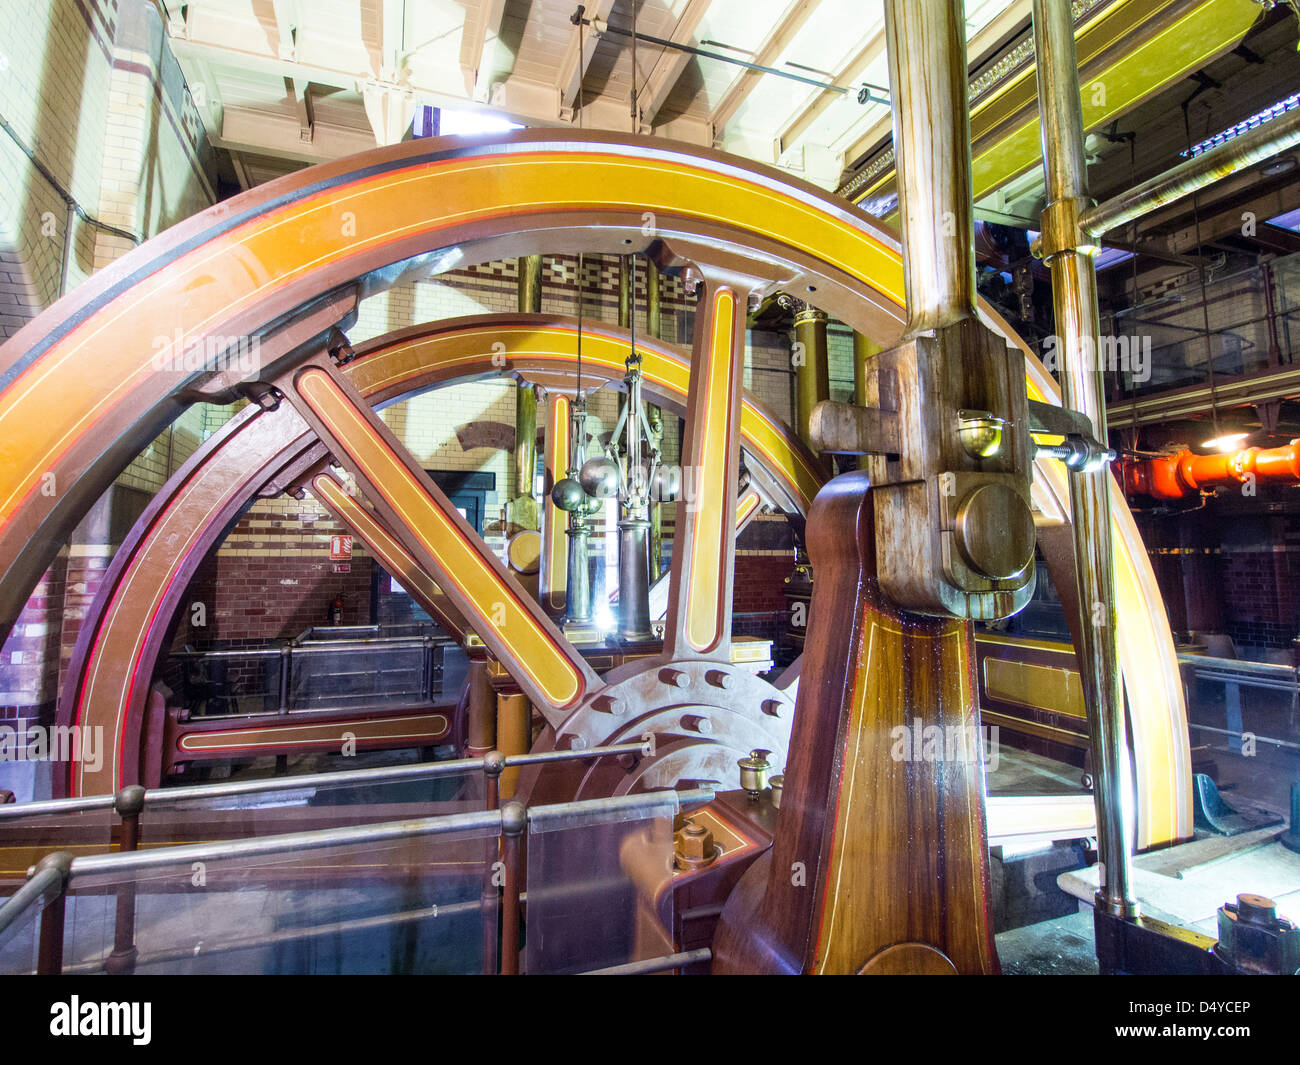 A Victorian steam engine in a sewage pumping station in Leicester, UK. Stock Photo